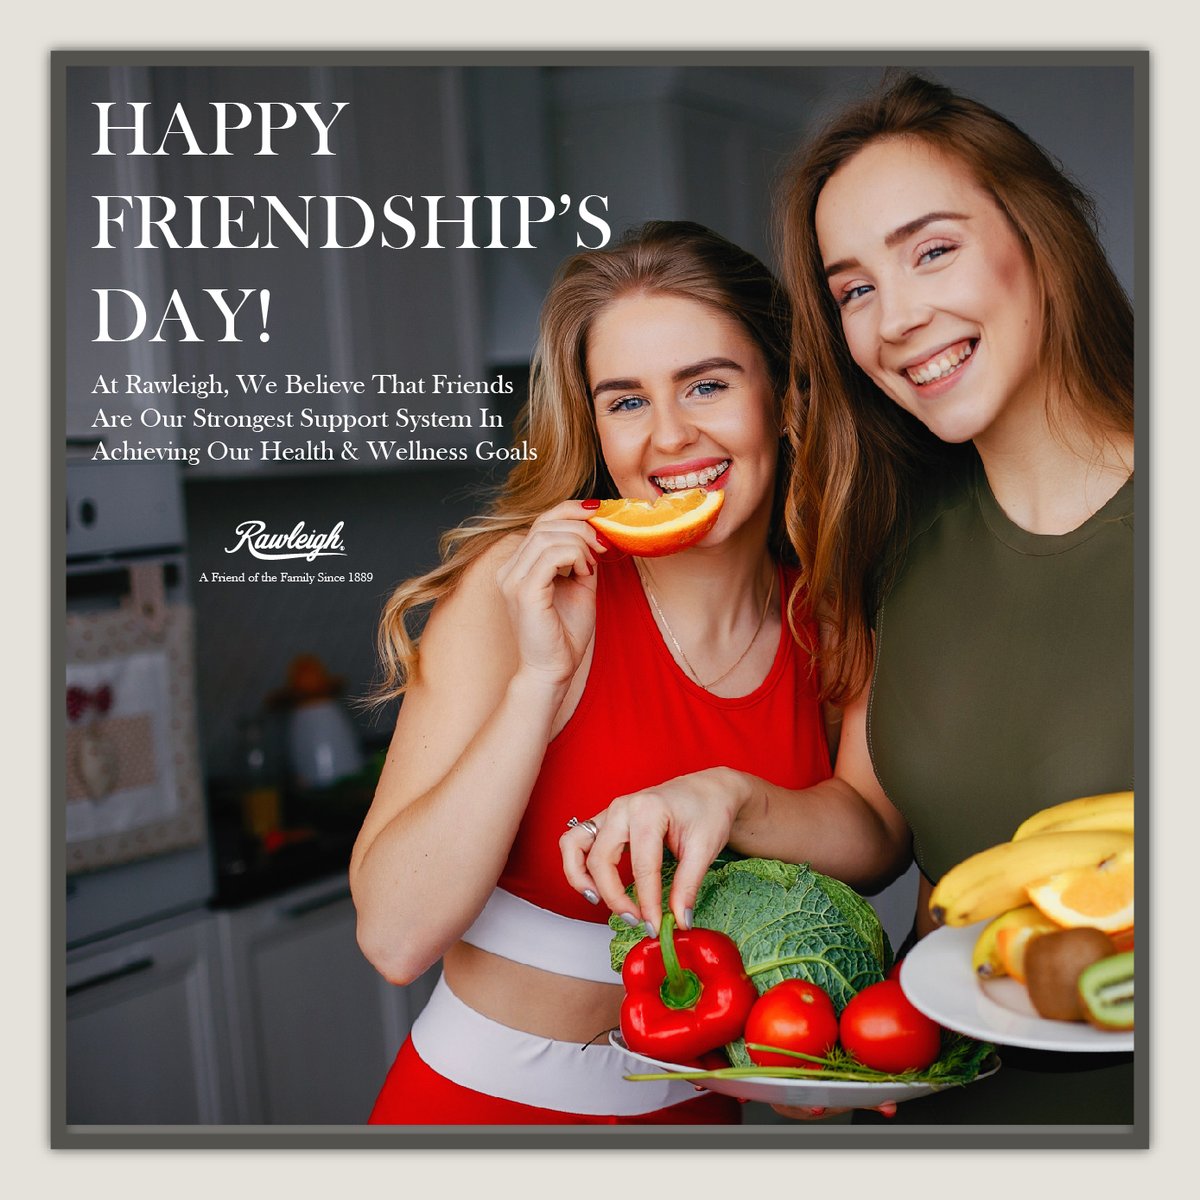 Tag that friend who always encourages you to stay fit and live your best life! 🏋️‍♀️💃 Together, let's unlock our full potential and reach new heights in our fitness journey. 🌄 #FriendshipsDay #SupportiveFriends #HealthAndWellness #SupplementsRawleigh